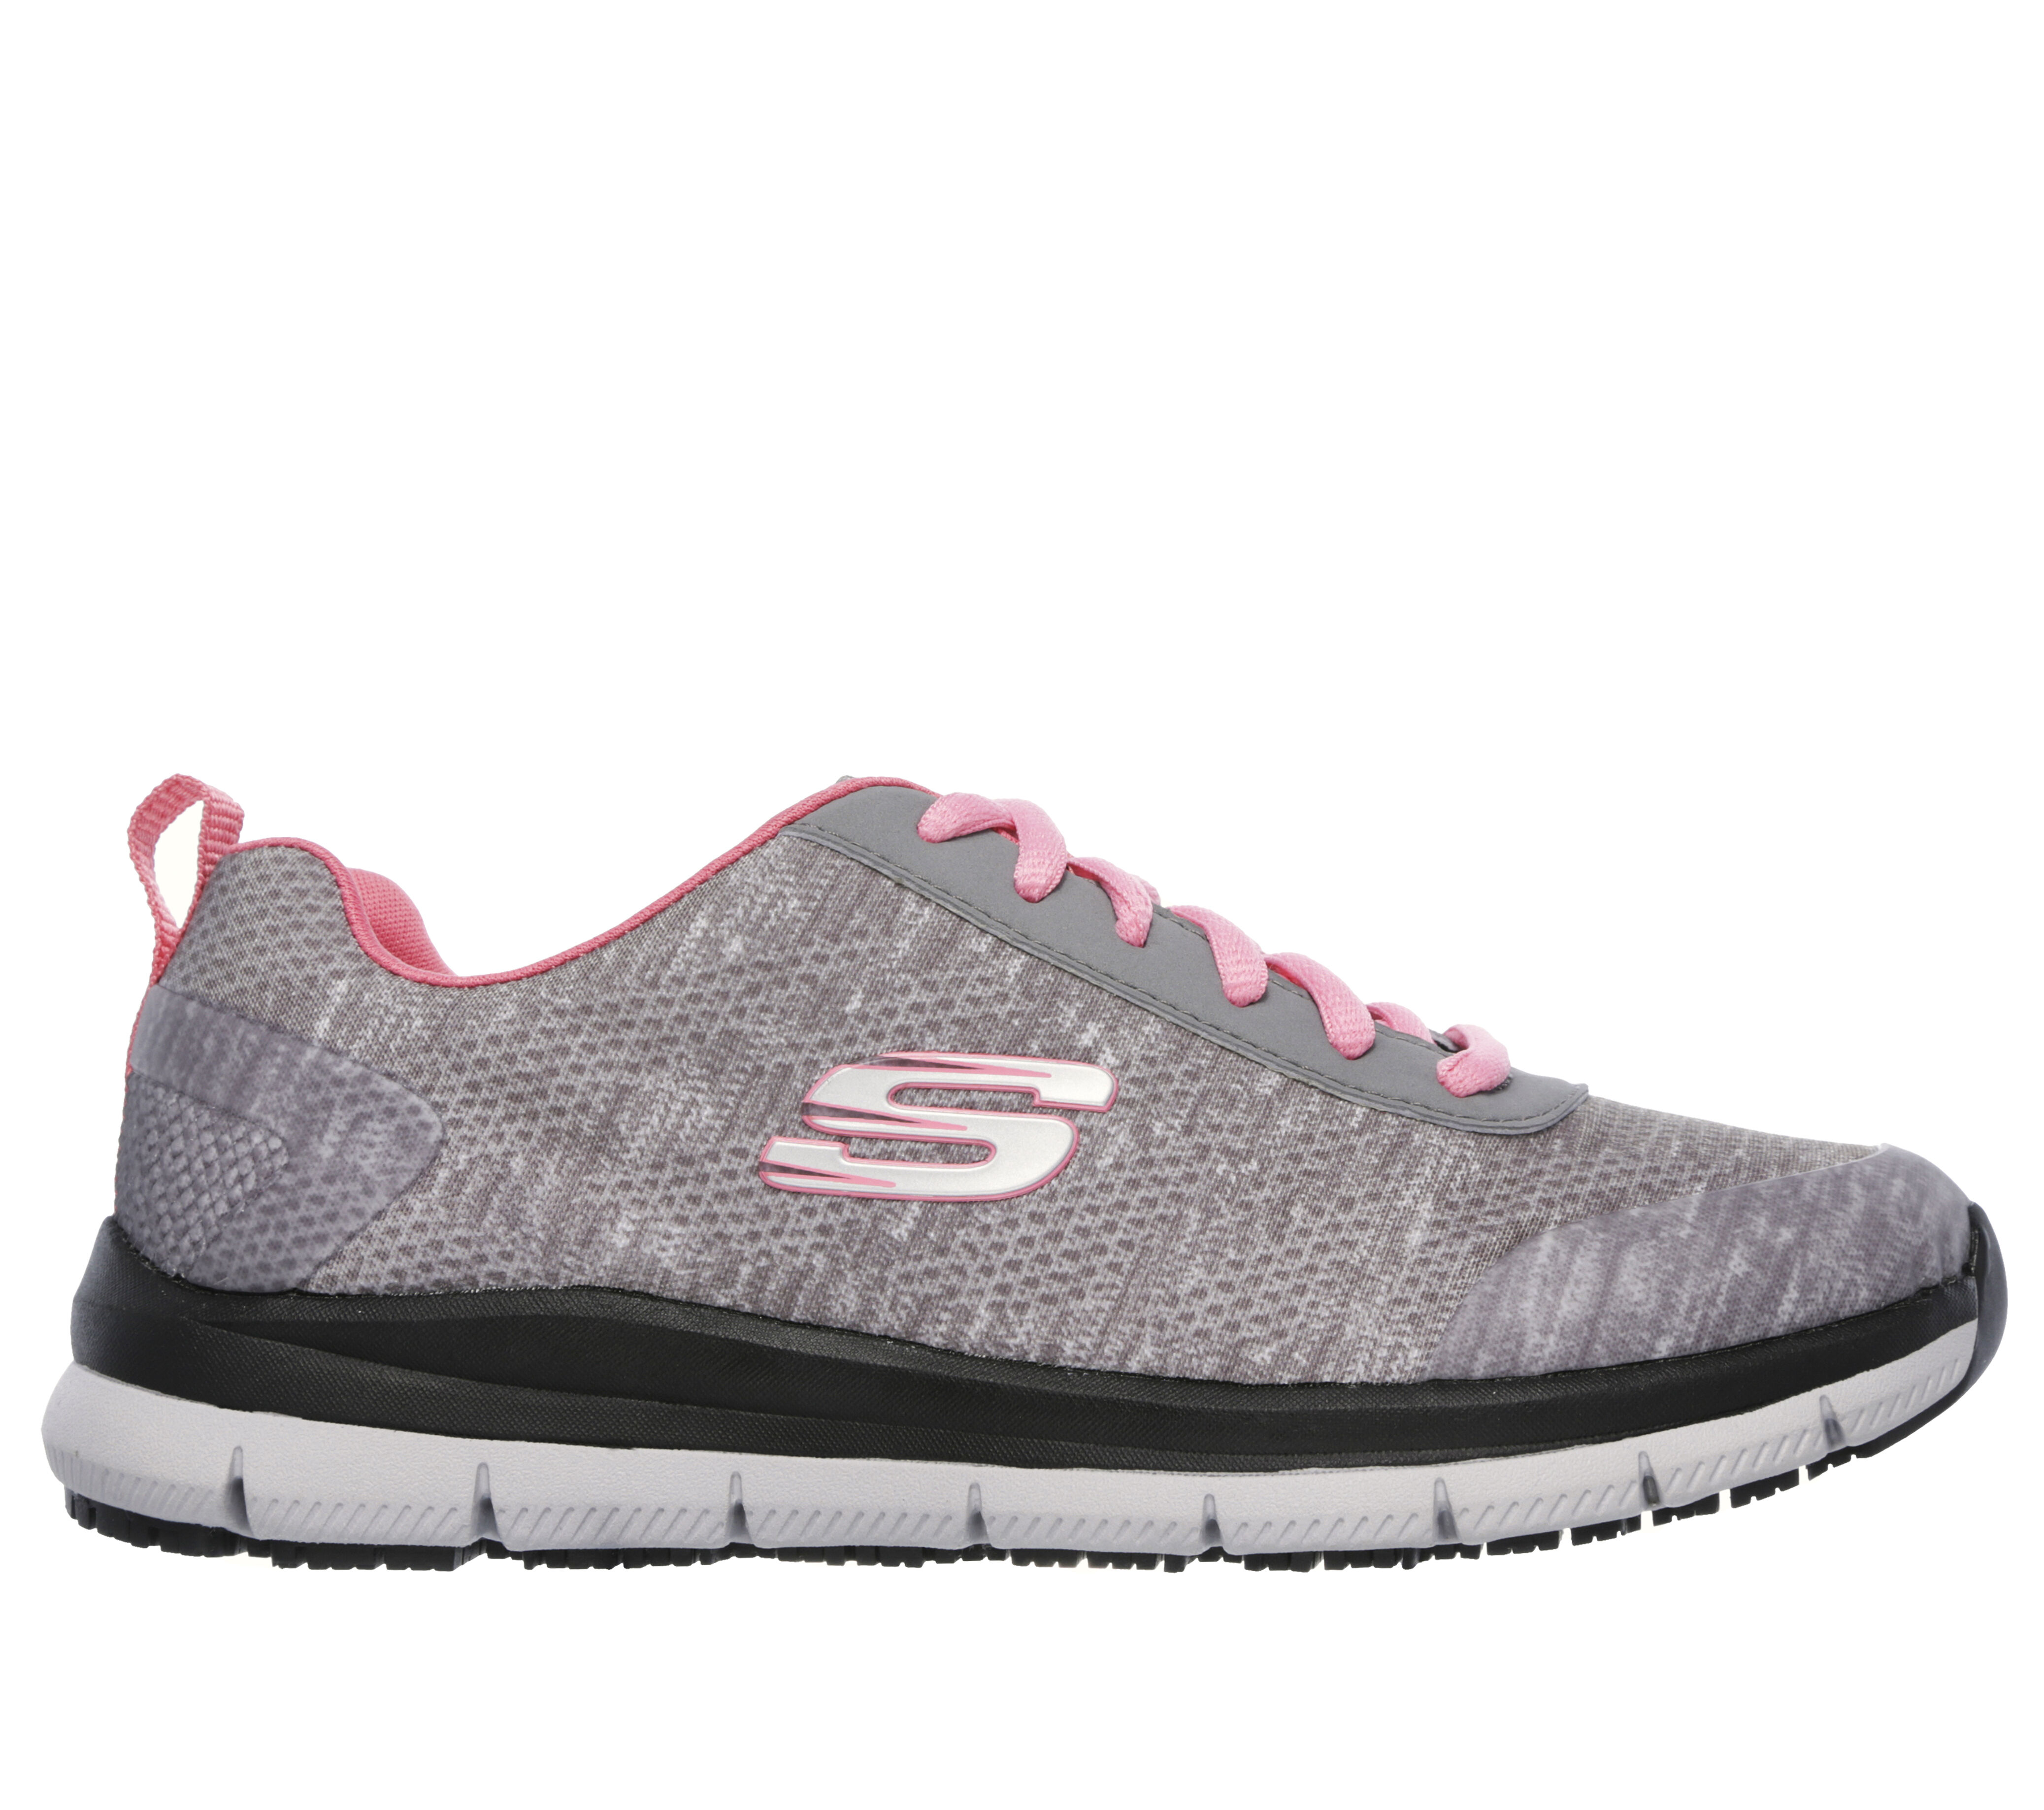 skechers new work shoes